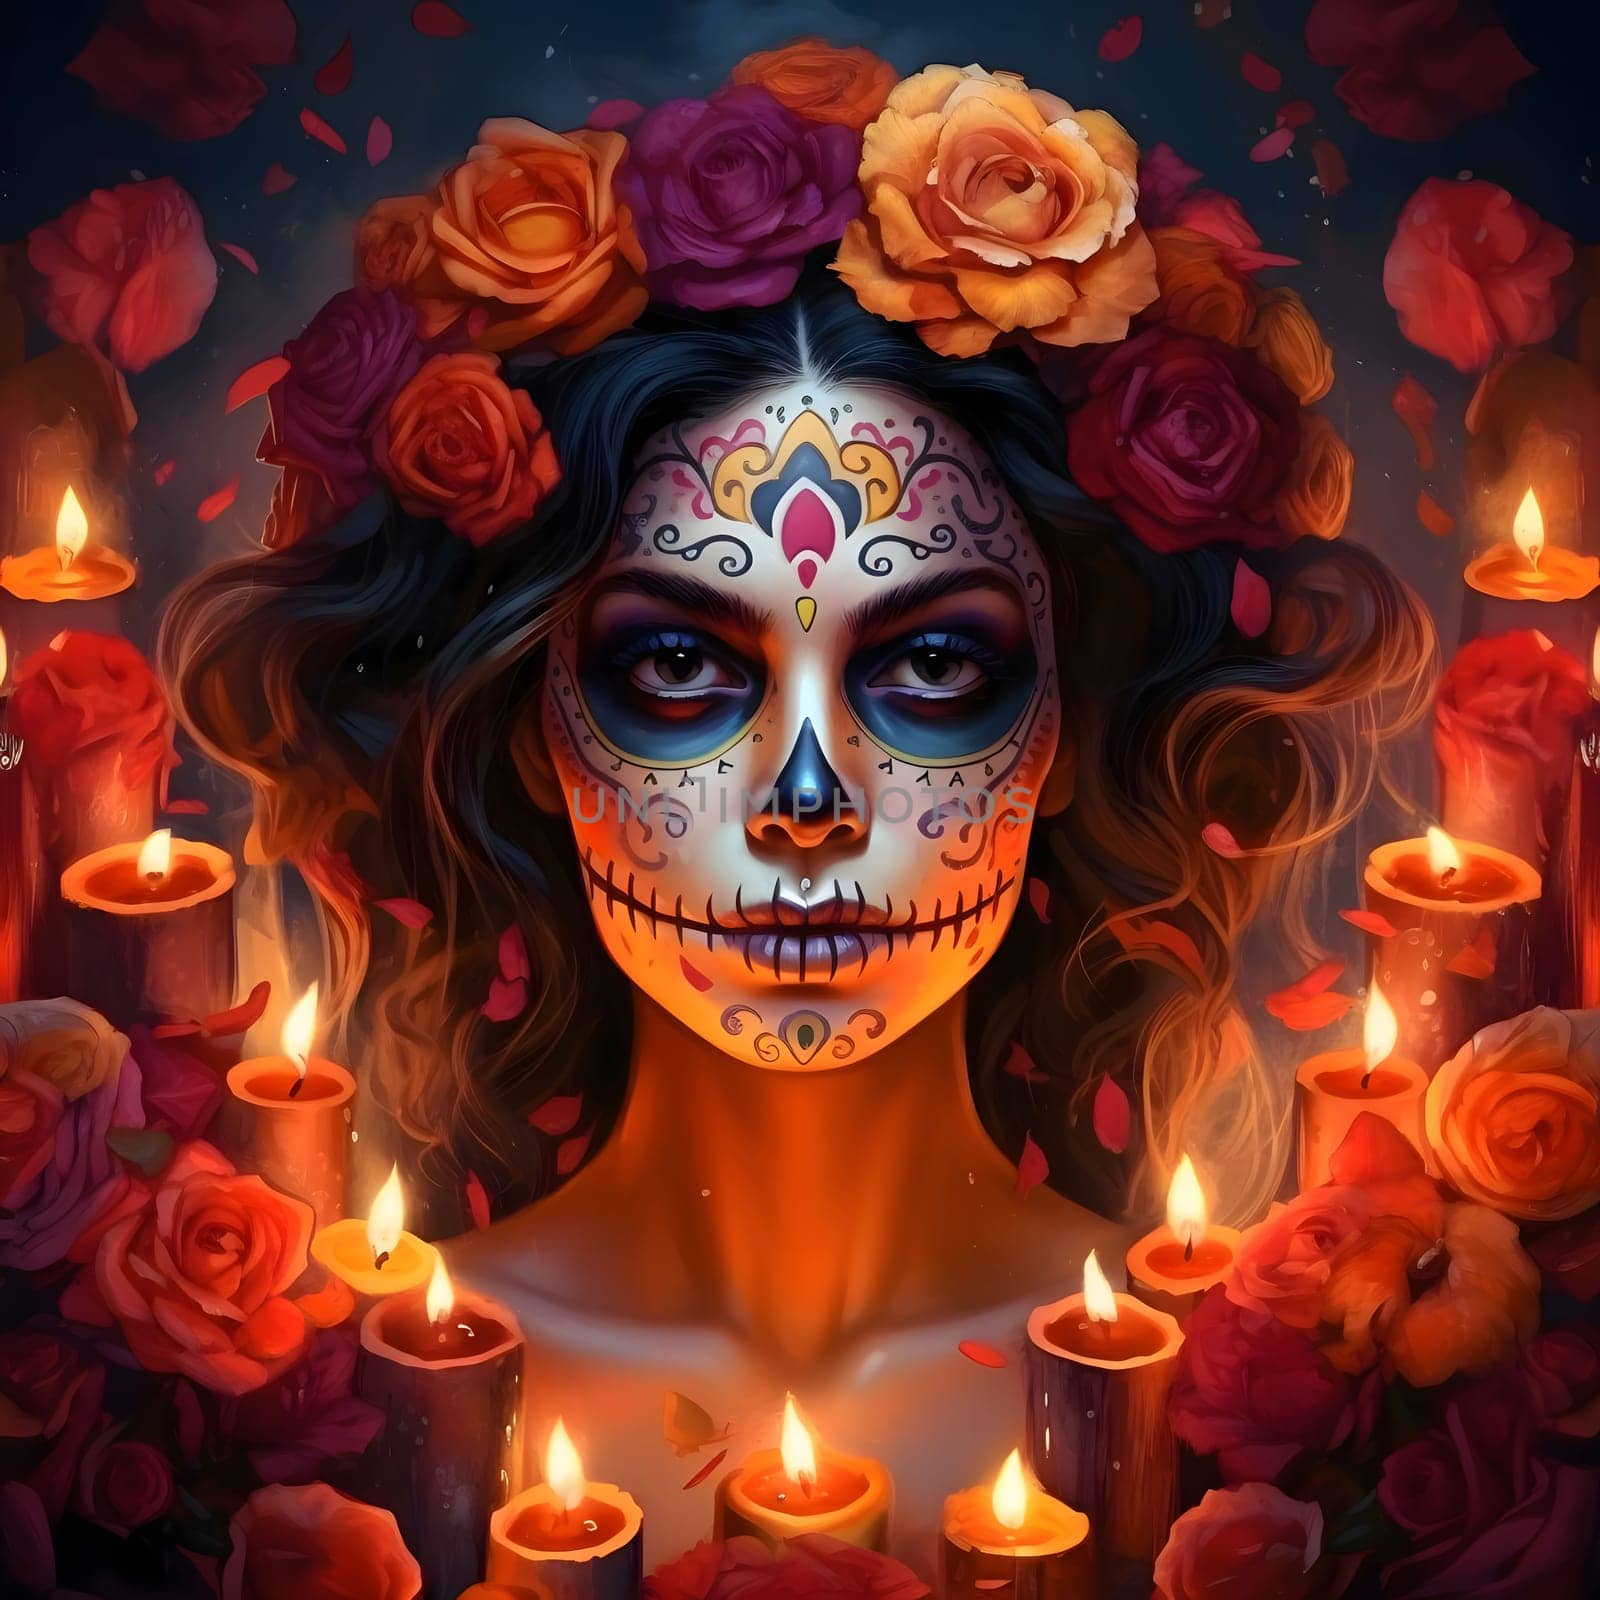 Dark painted face of a woman with sewn lips, head decorated with colorful roses, candles all around For the day of the dead and Halloween. by ThemesS